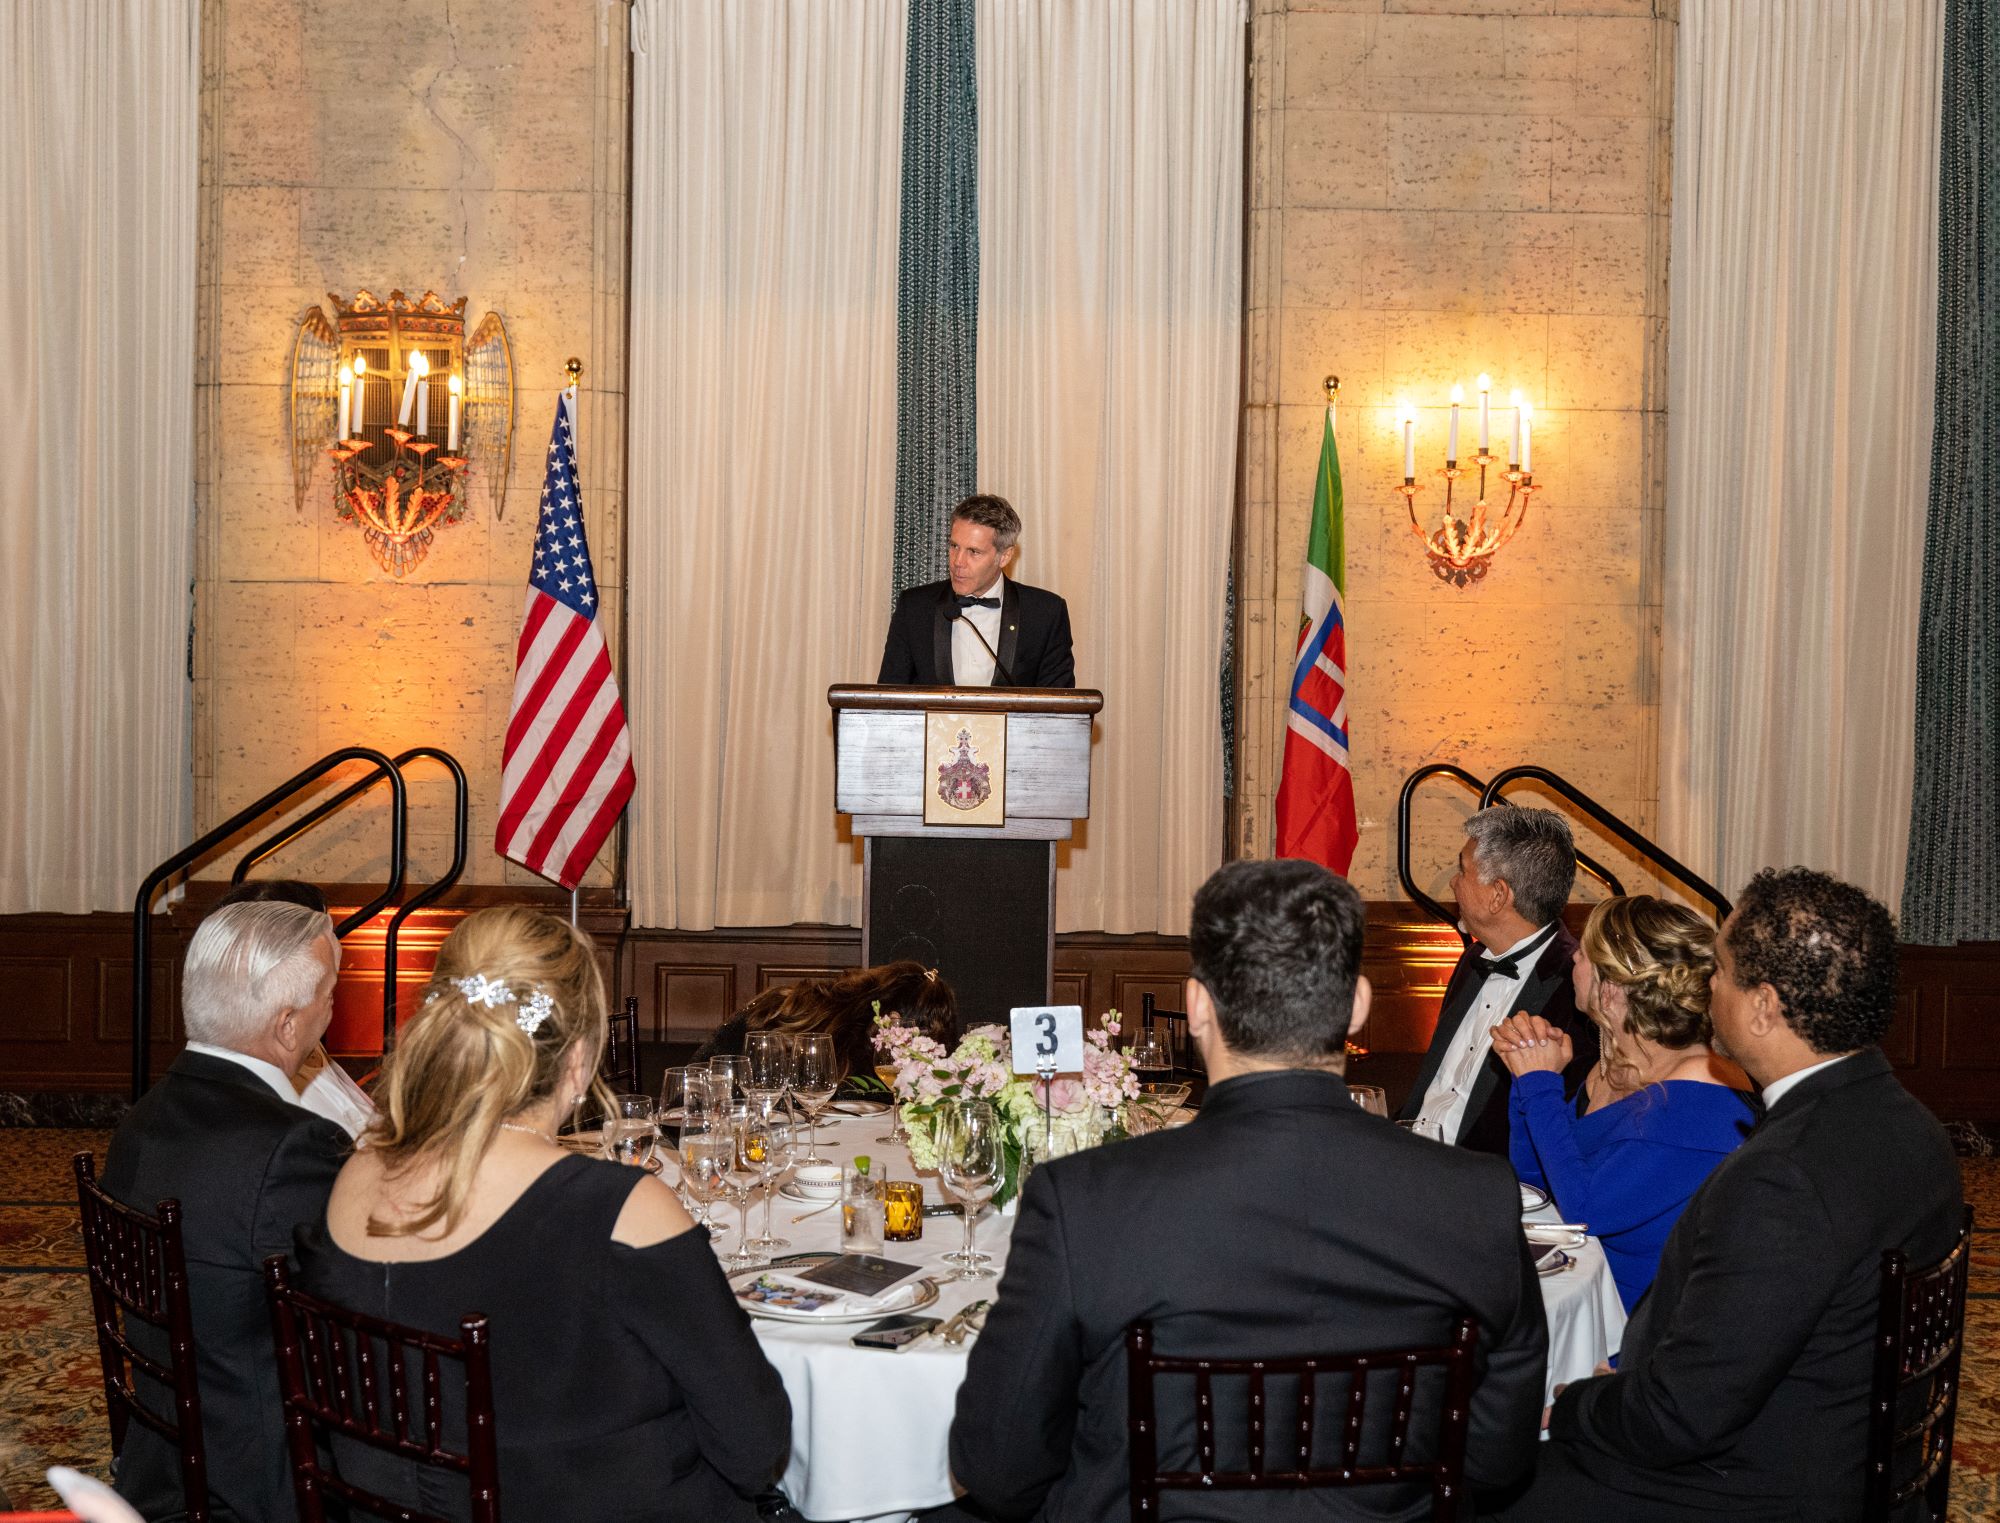 HRH Prince Emmanuel Philibert of Savoy, Guest of Honor, Addresses the Attendees of the 5th Annual Notte di Savoia Los Angeles Gala Dinner, April 29, 2023